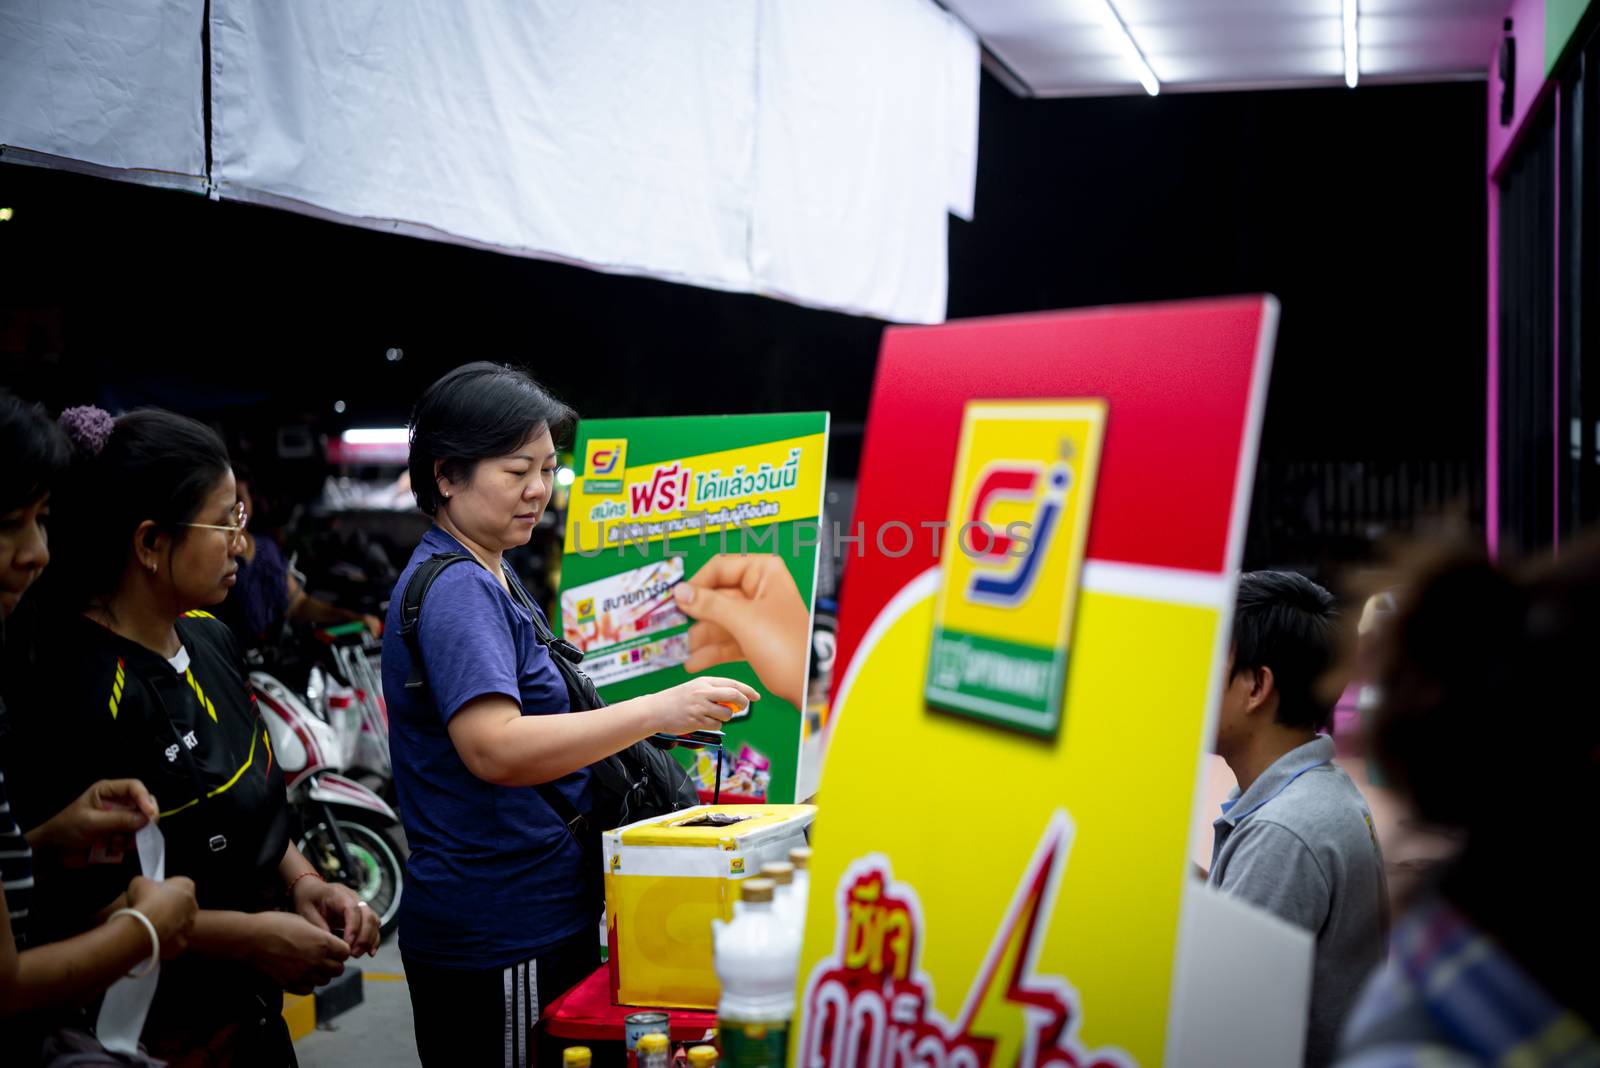 Bangkok, Thailand - November 16, 2019 : Unidentified asian woman feeling happy when her purchase a product and QR code scan by mobile phone in department store or exhibit hall expo